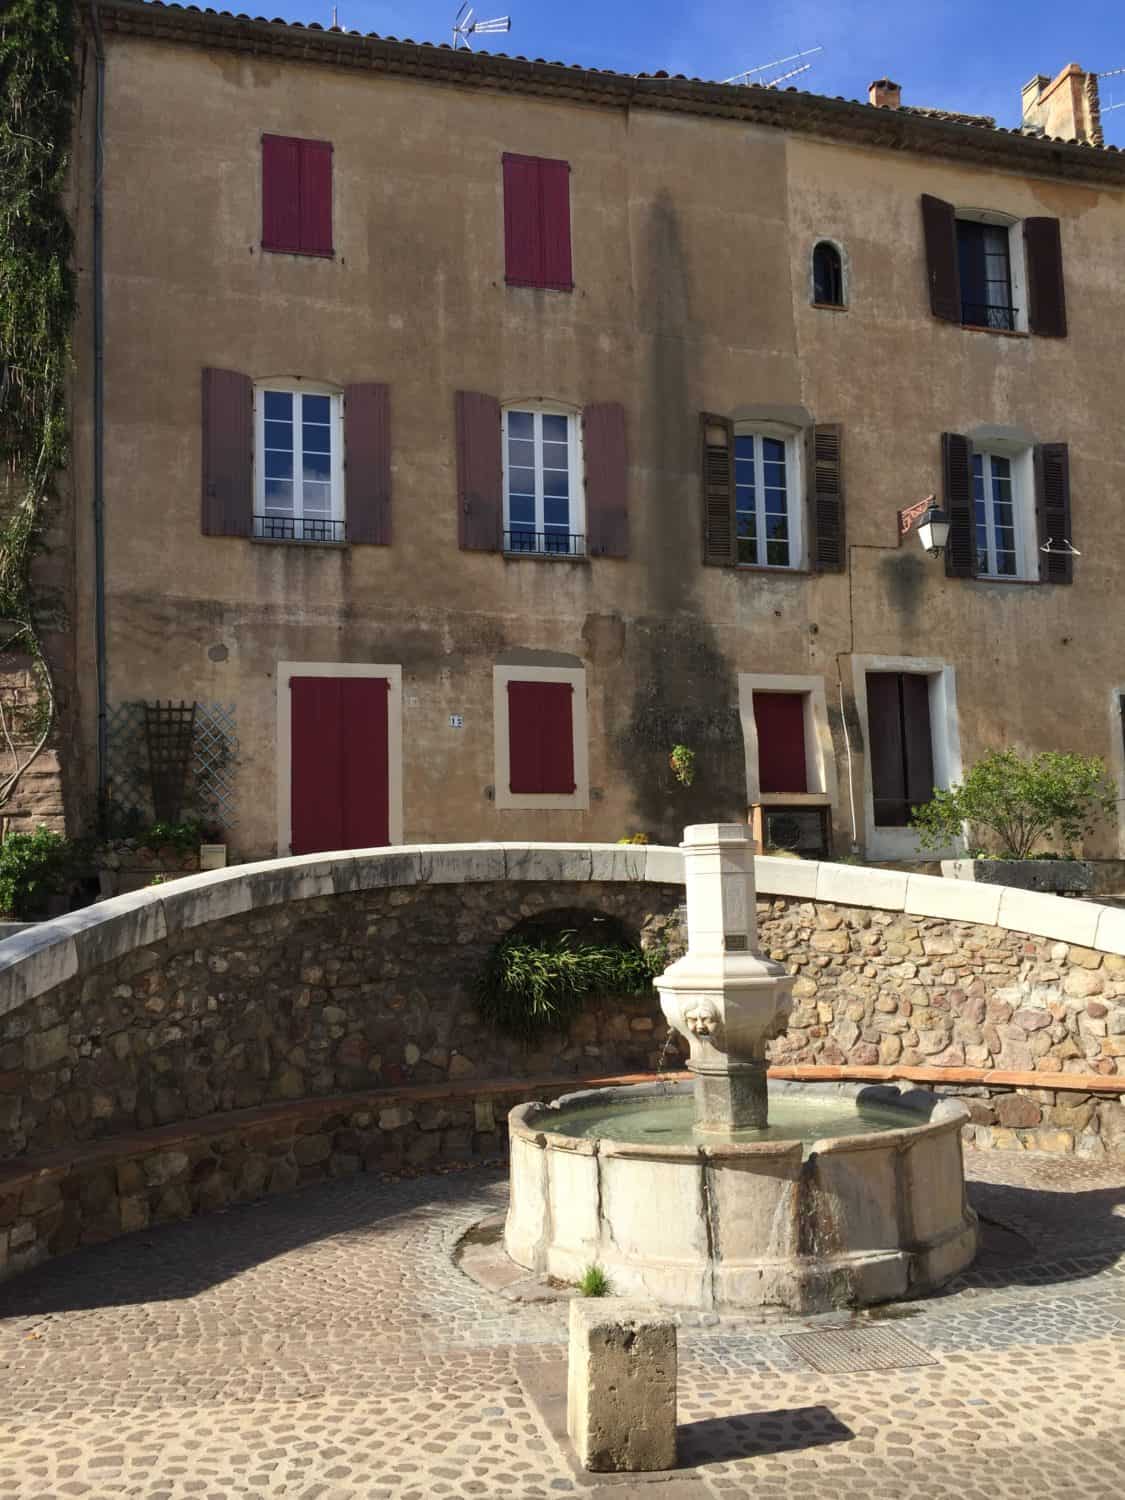 Why you should consider using little Roquebrune-sur-Argens as your base in the south of France | French Riviera towns, where to stay in the south of France | Roquebrune sur Argens #france #roquebrune #frenchriviera